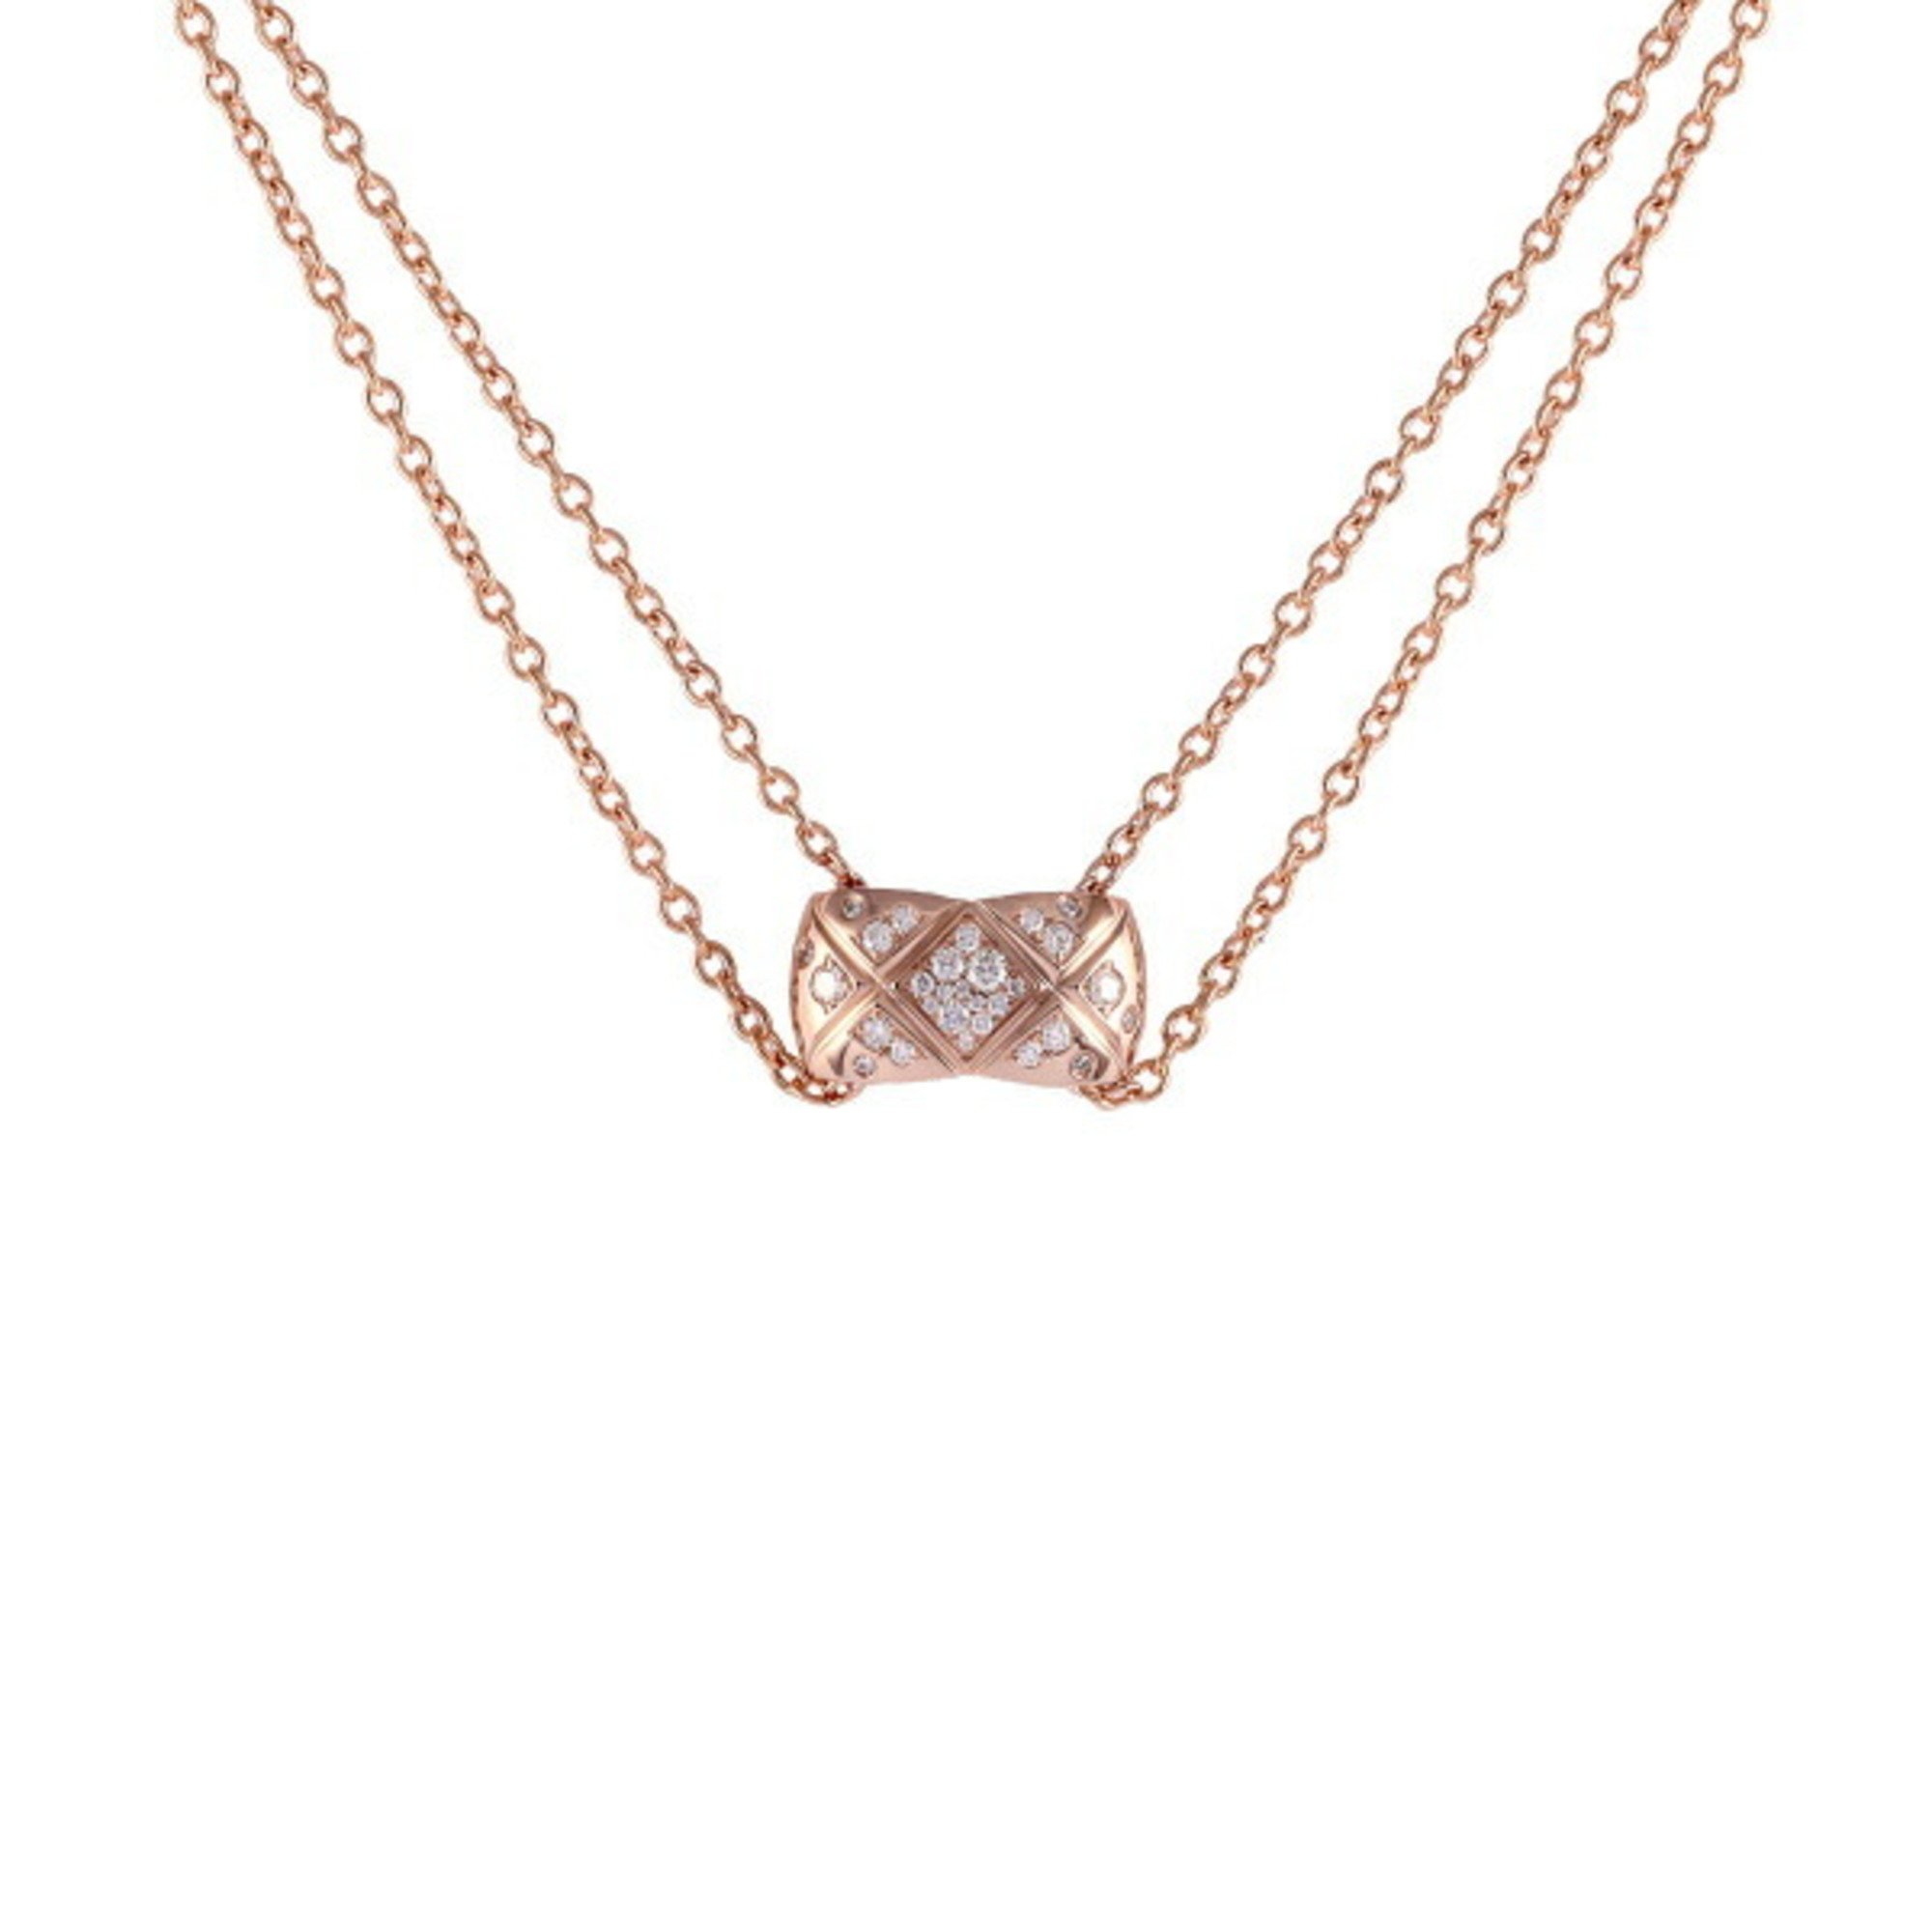 Chanel Coco Crush K18PG Pink Gold Necklace J364474